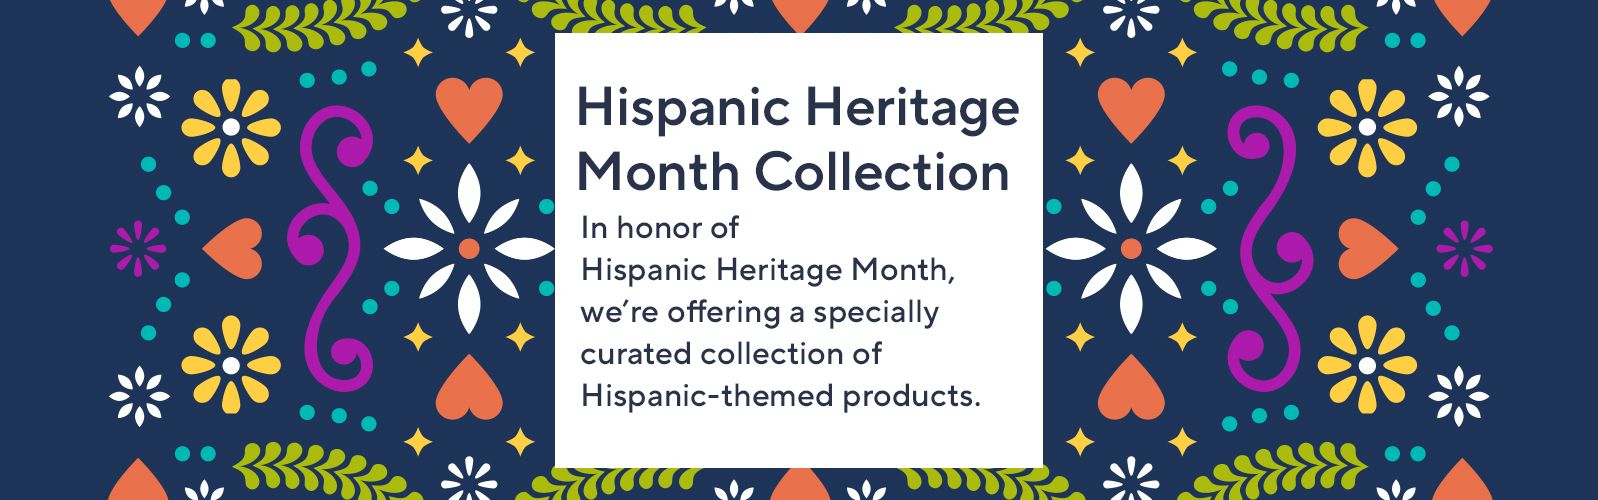 Hispanic Heritage Month Collection: In honor of Hispanic Heritage Month, we’re offering a specially curated collection of Hispanic-themed products. 